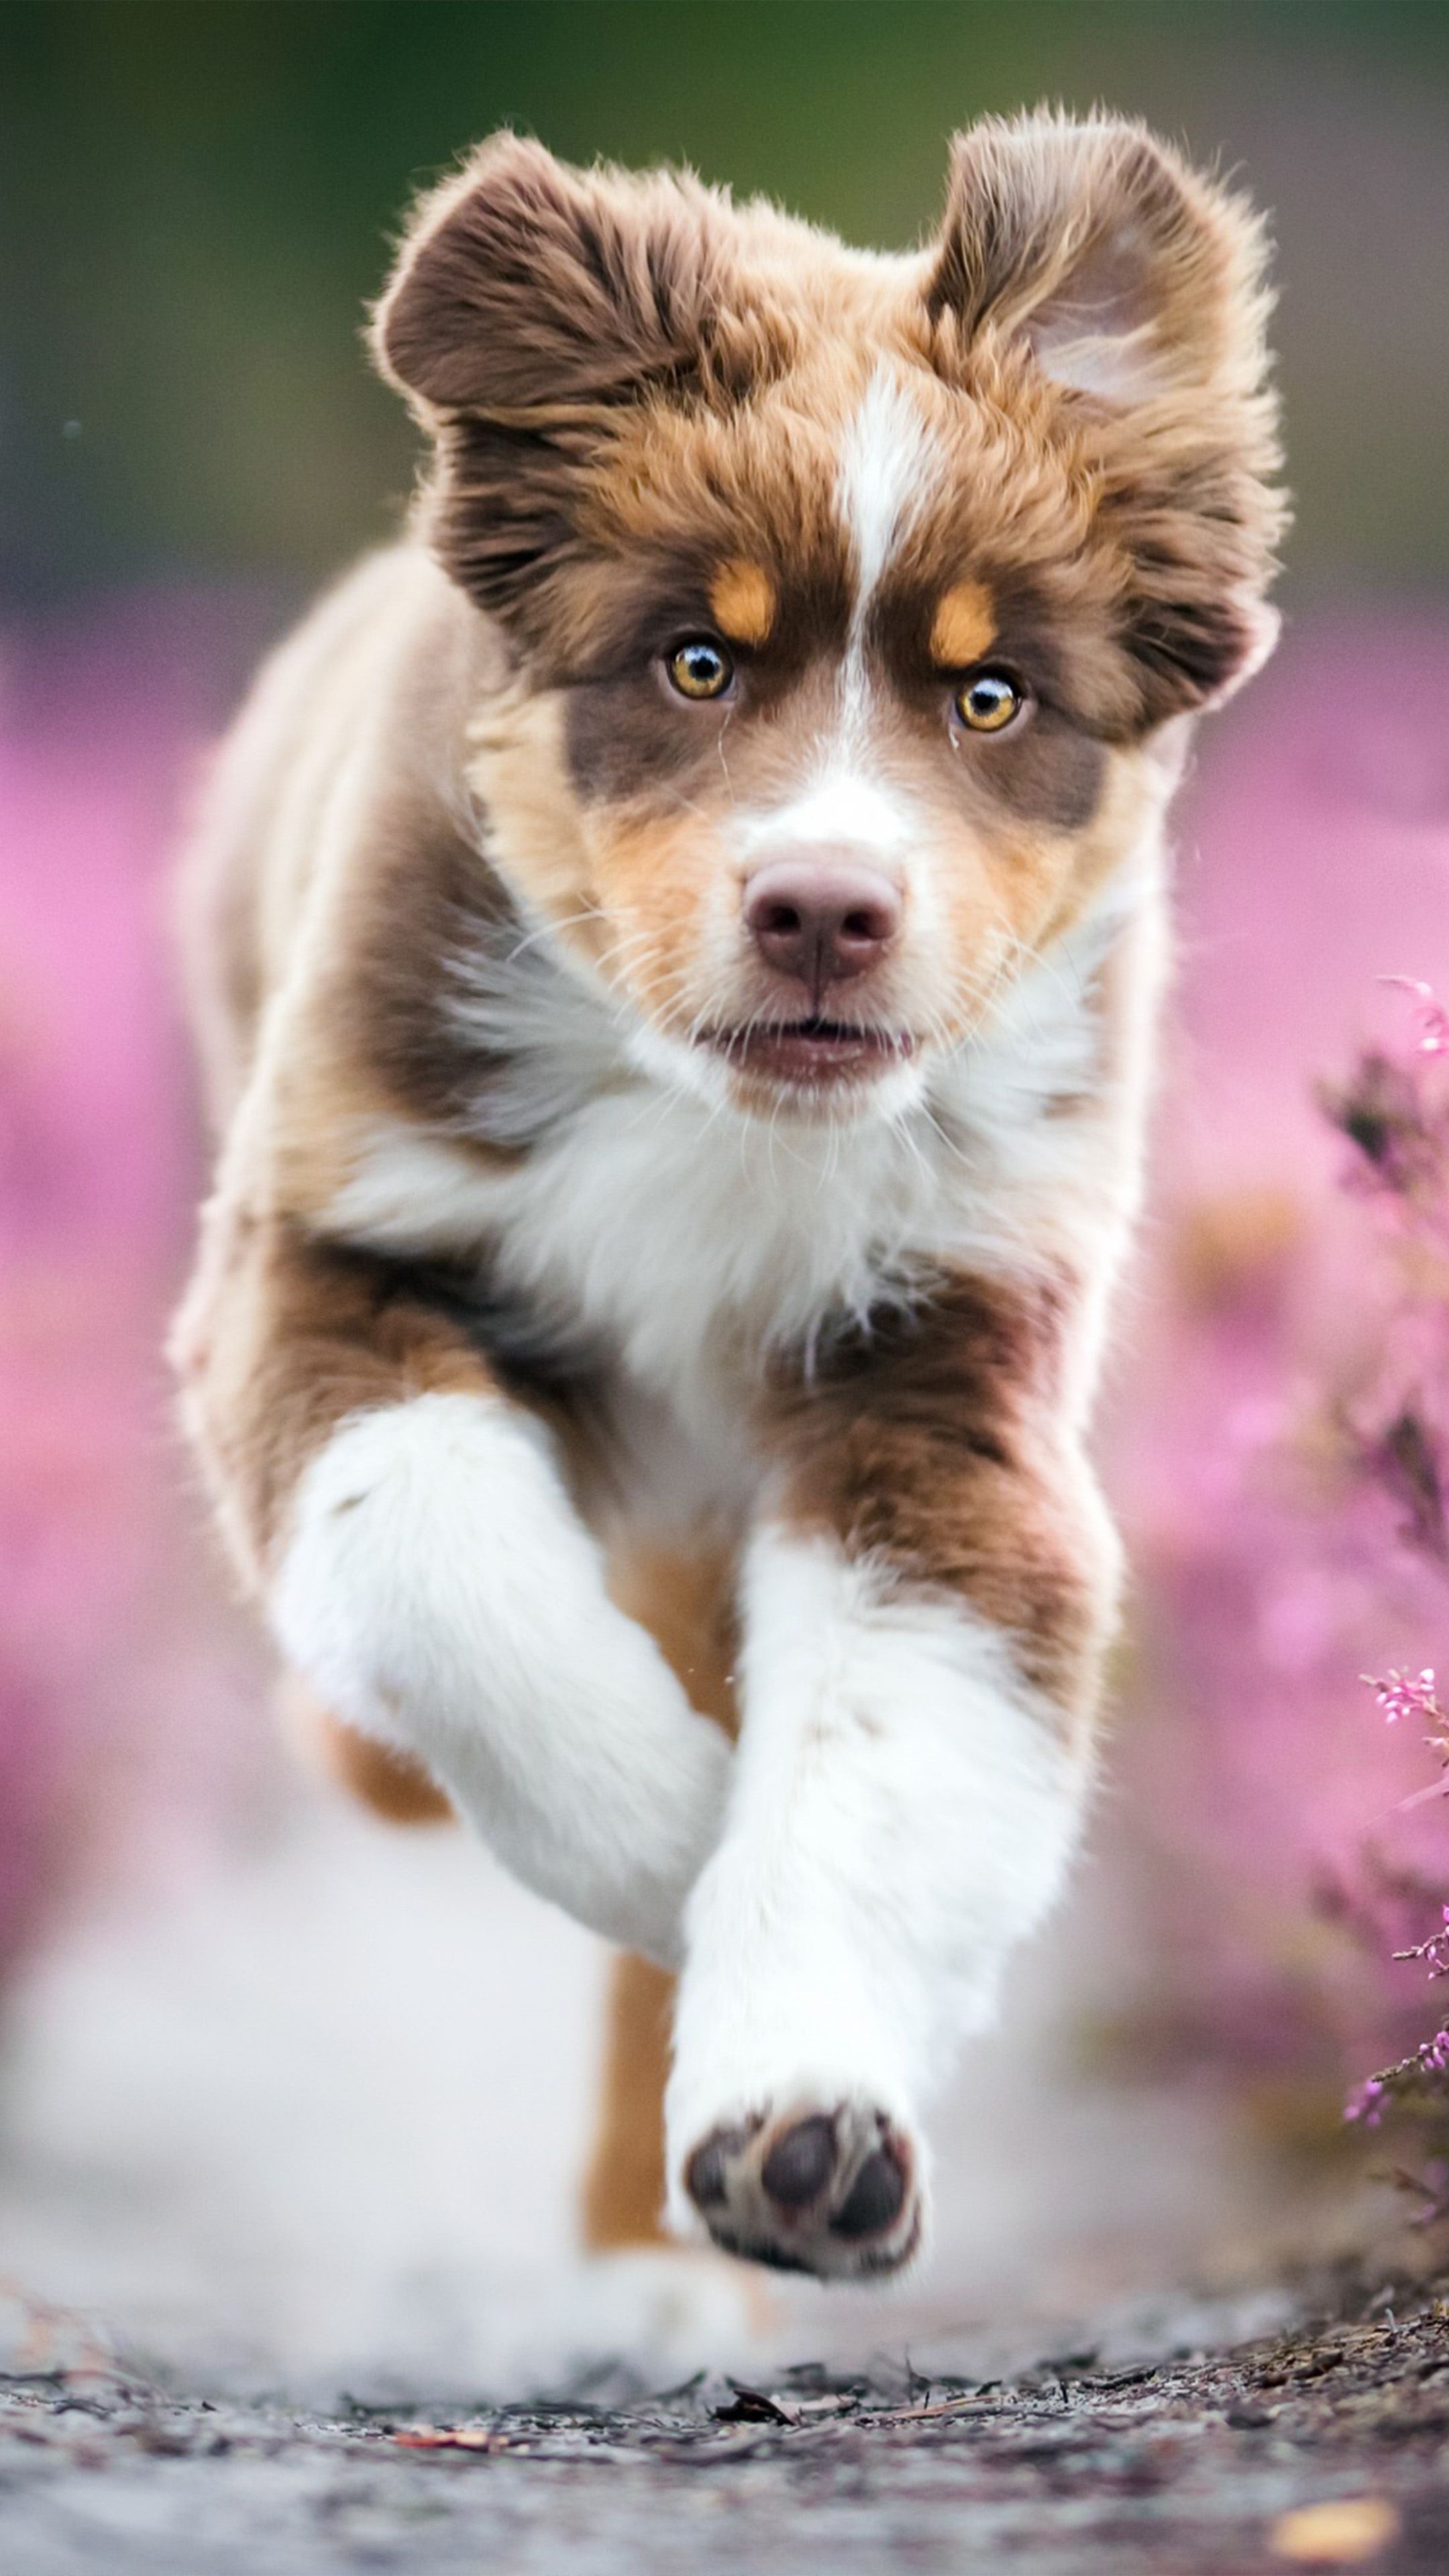 Pup ideas, Cute baby dogs, Playful companions, Heartwarming moments, 2160x3840 4K Phone